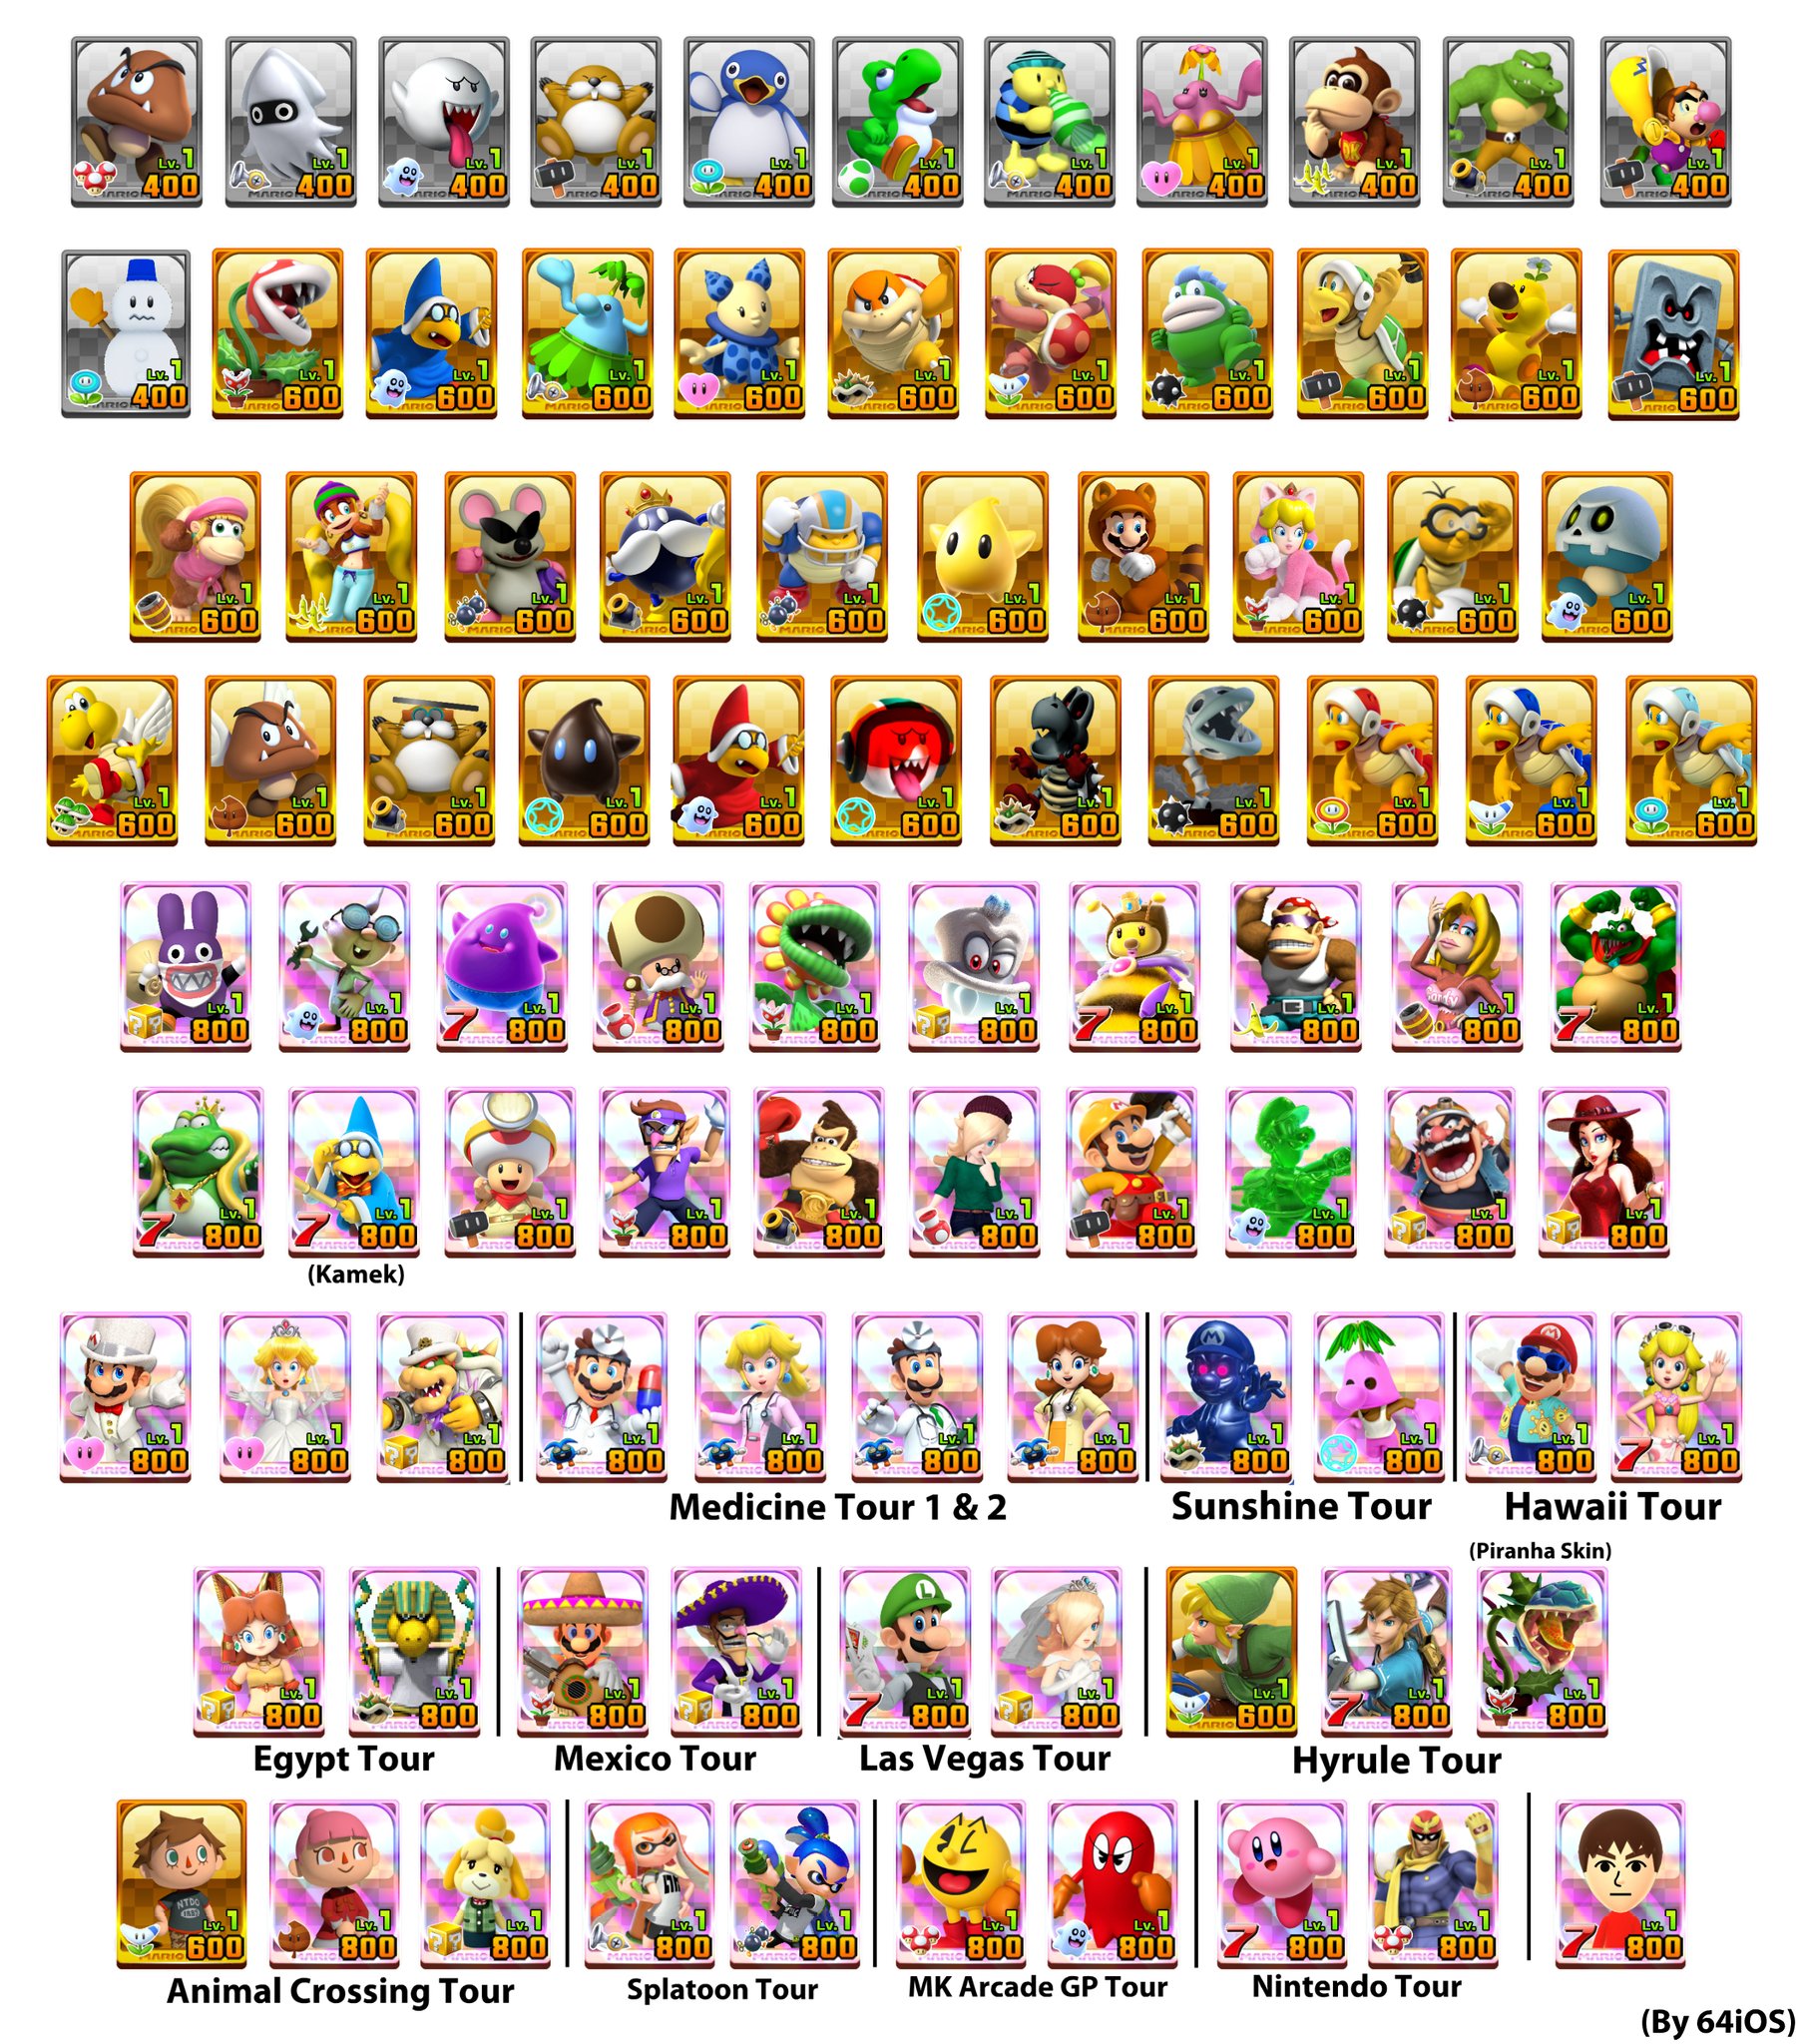 Champion Rey Been Working On This For Awhile Nearly 100 Character Ideas For Mario Kart Tour T Co Qkt10yj6xa Twitter